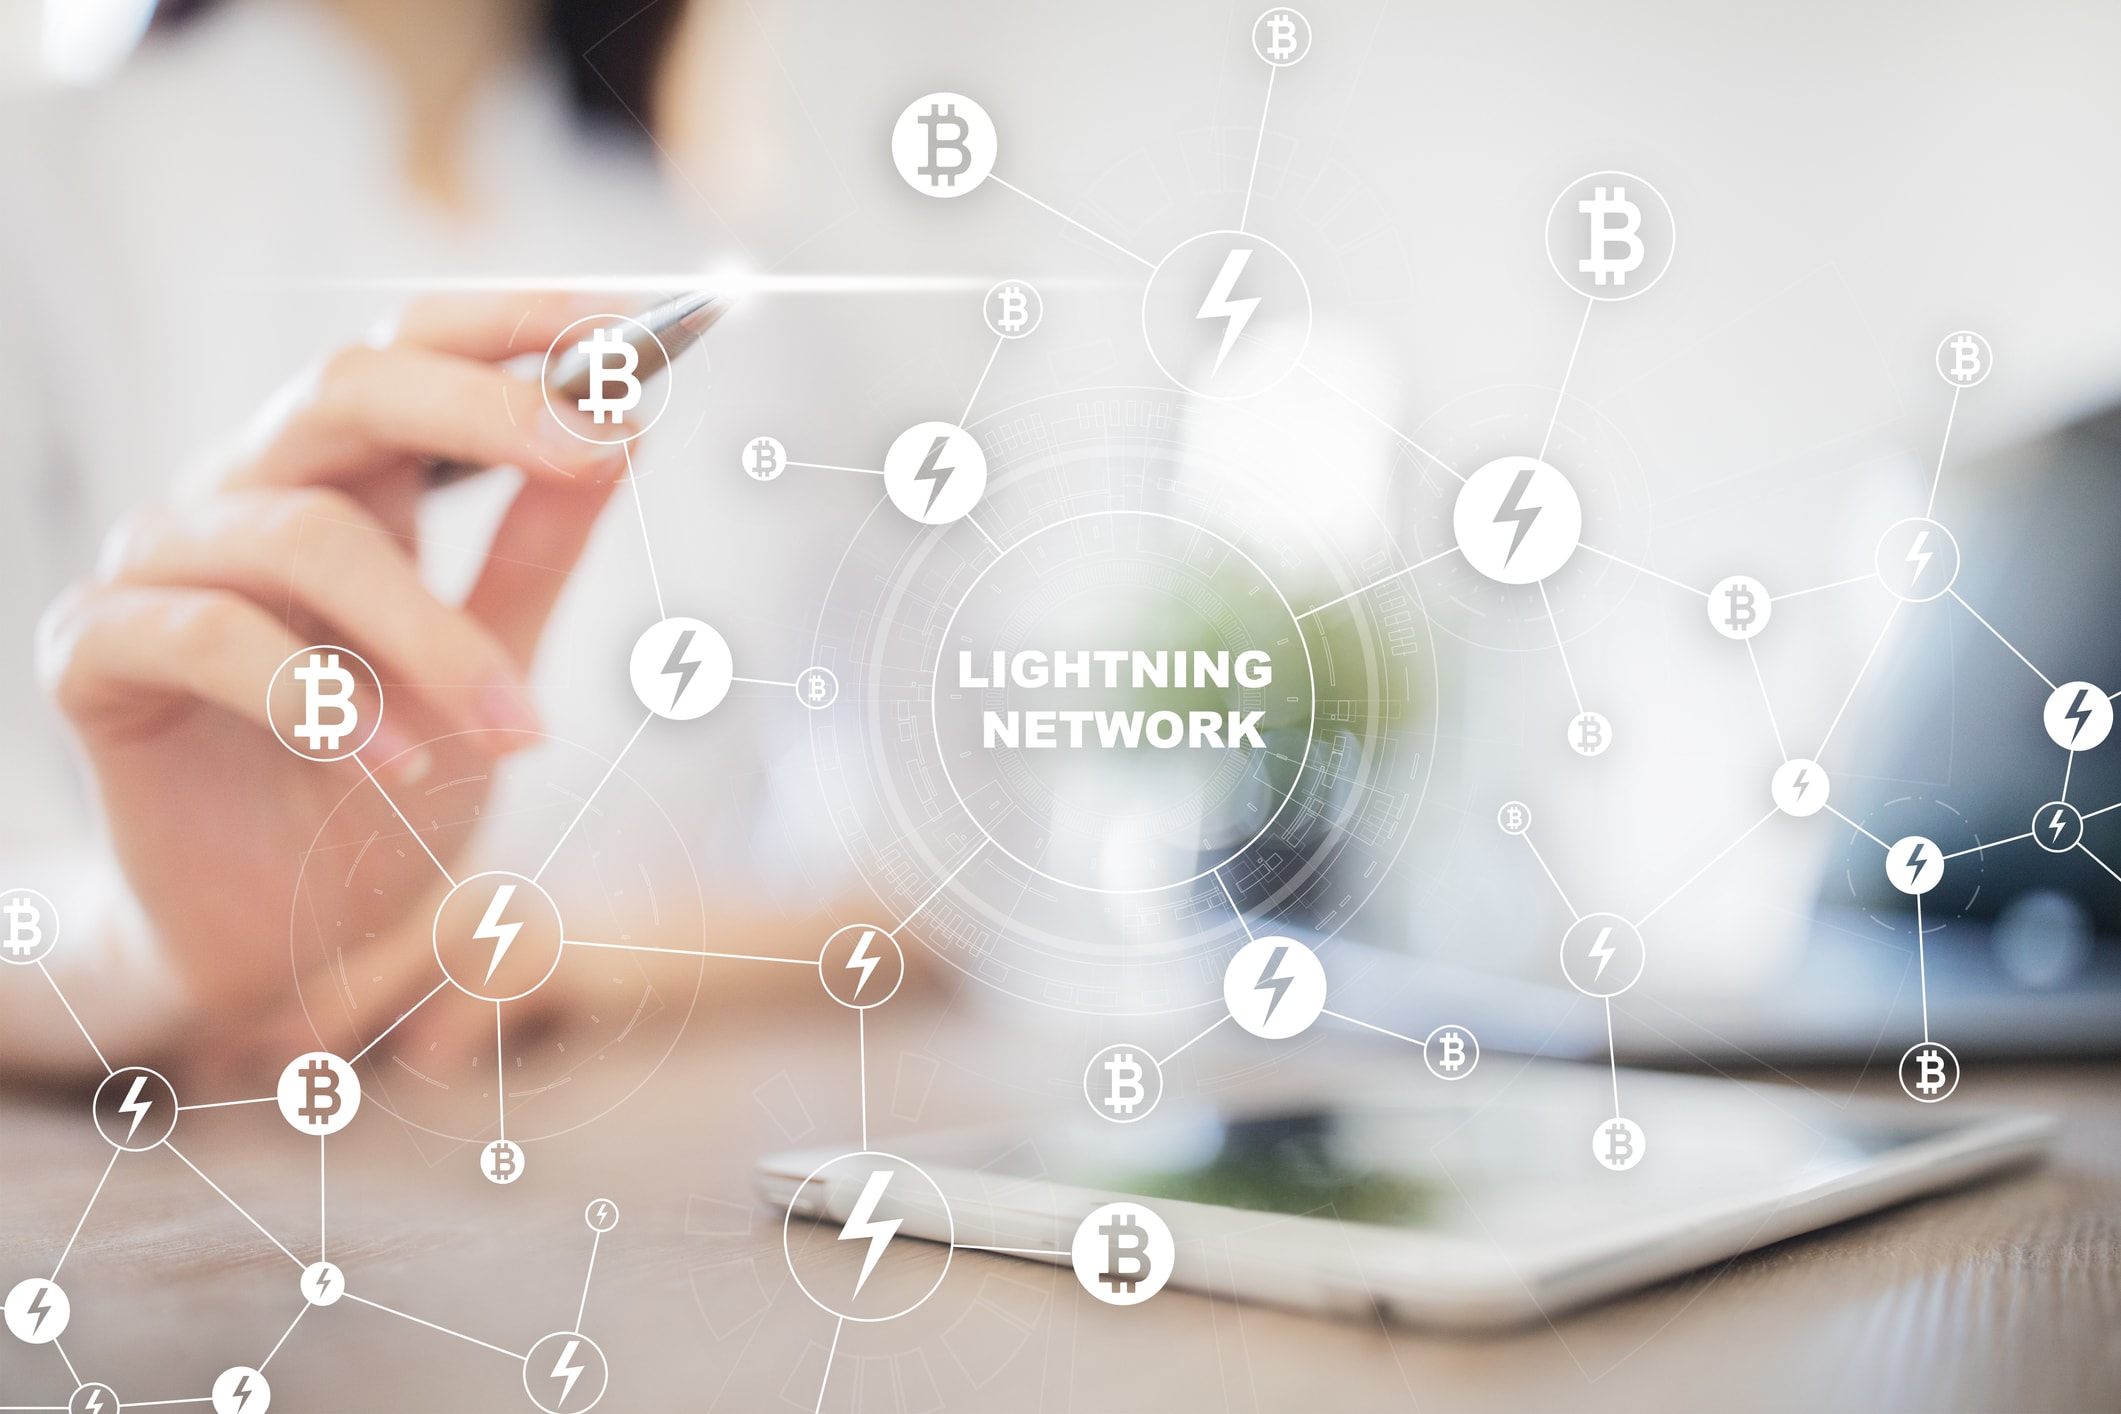 The new game from Satoshi’s Games: Lightning Agar